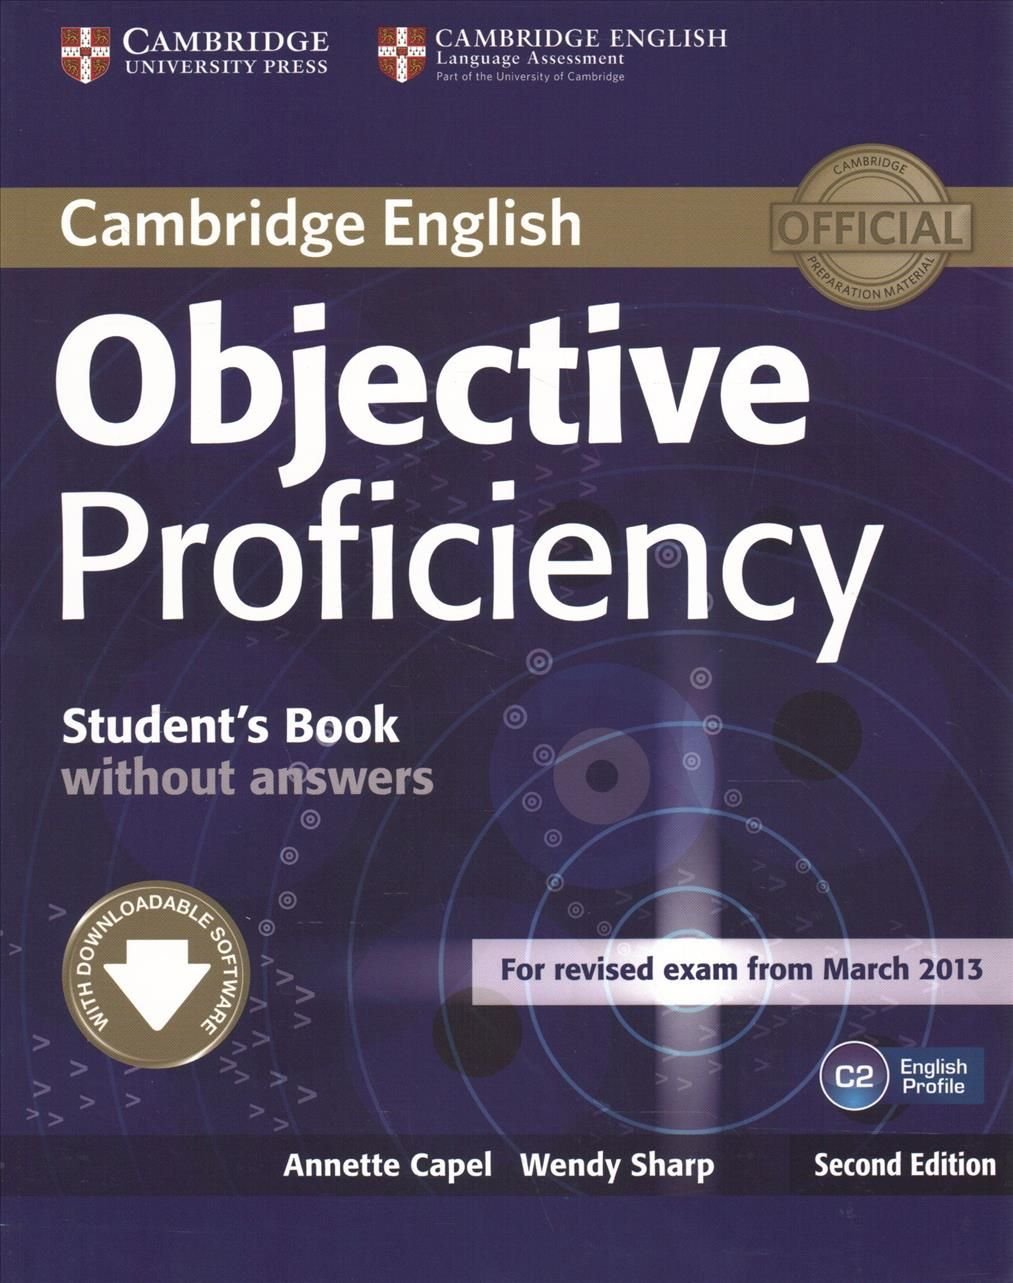 by　Proficiency　Free　Software　Student's　Annette　Book　Delivery　without　Capel　Answers　with　Downloadable　With　Buy　Objective